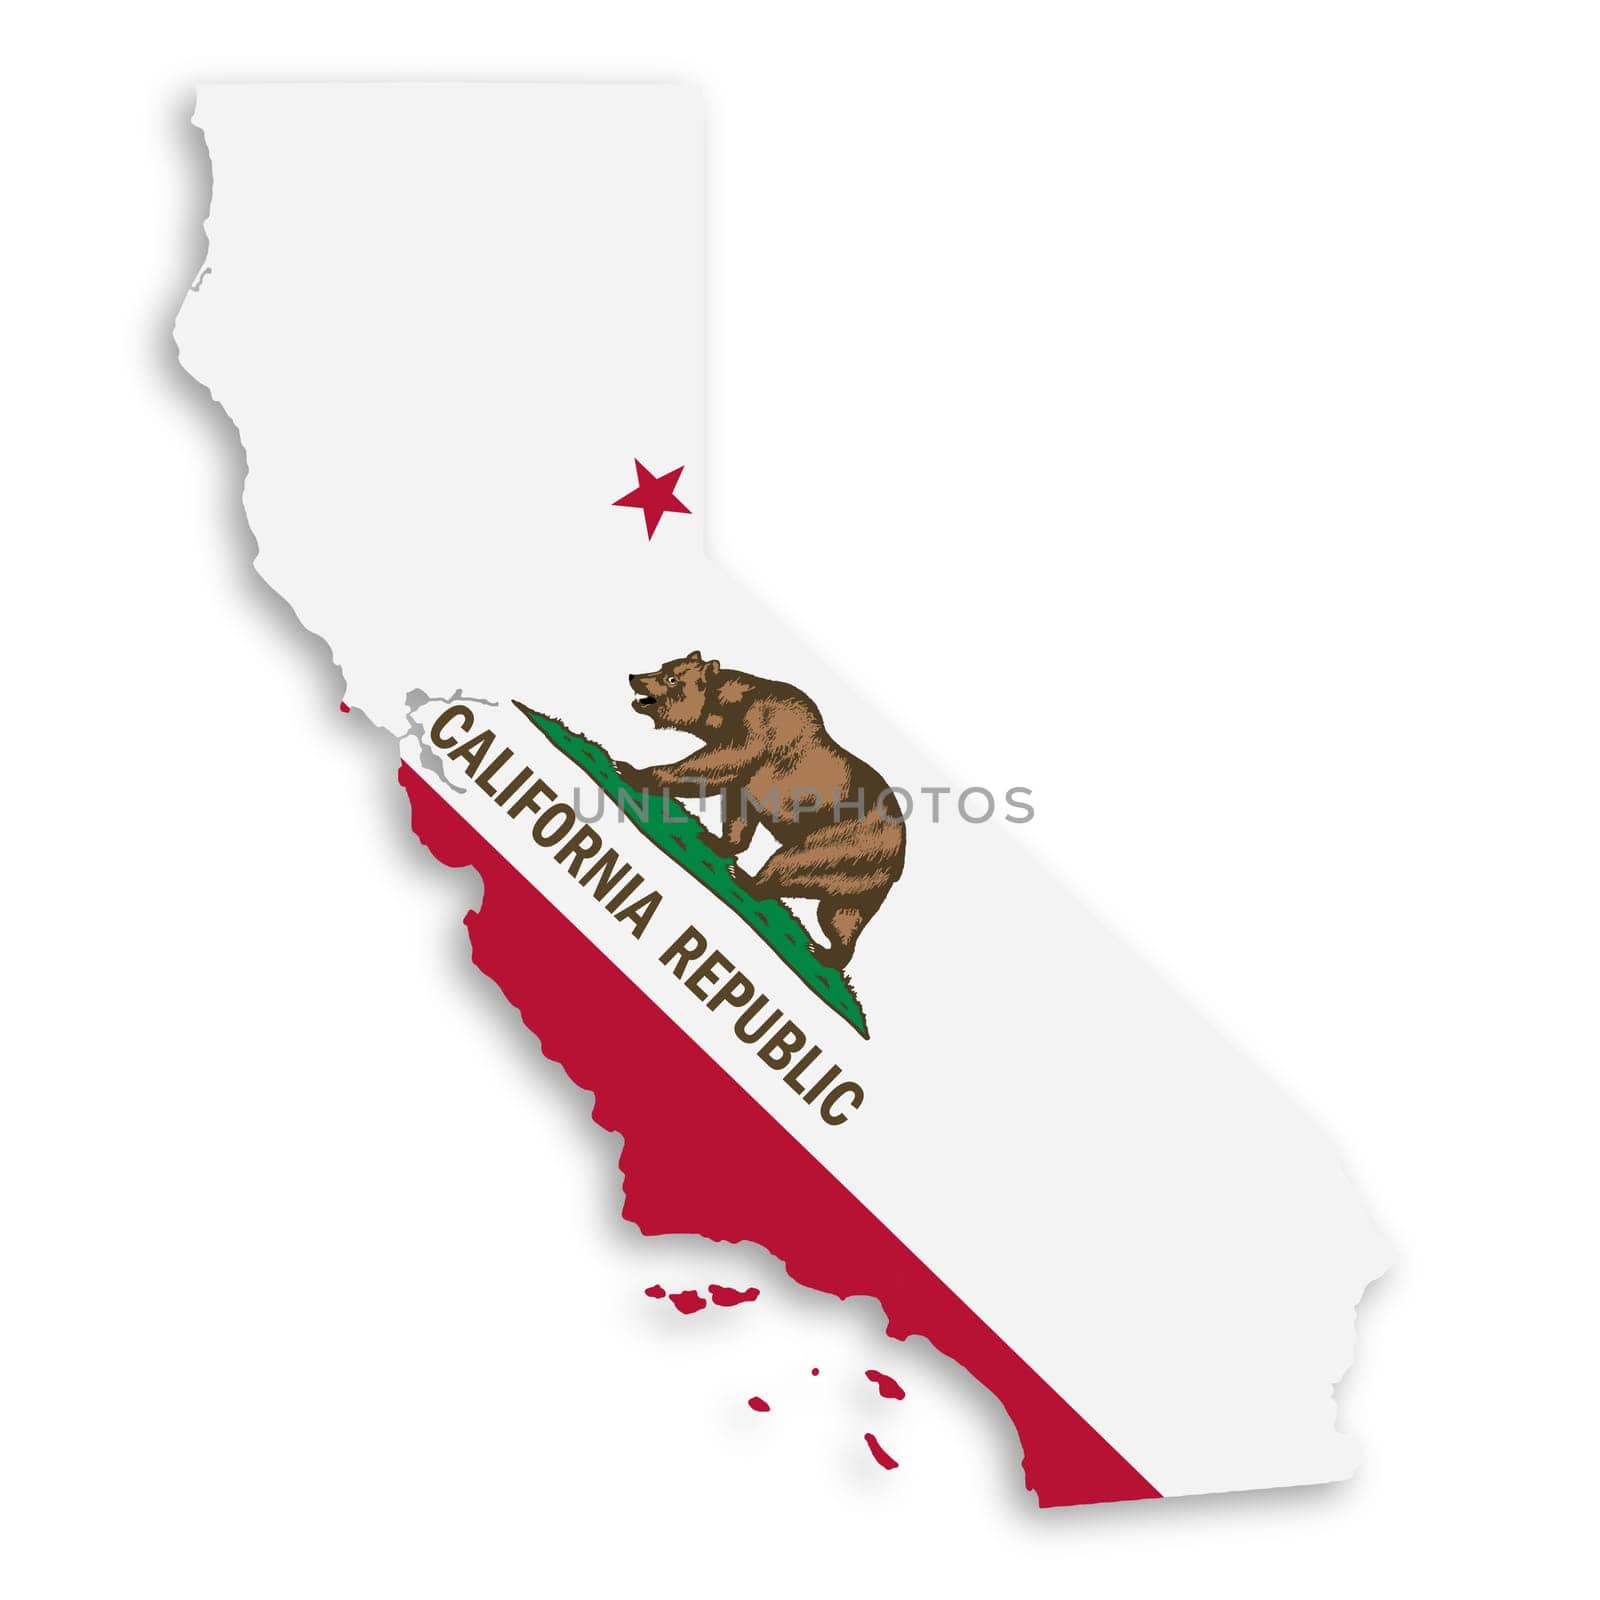 A California State Flag Map Illustration with clipping path